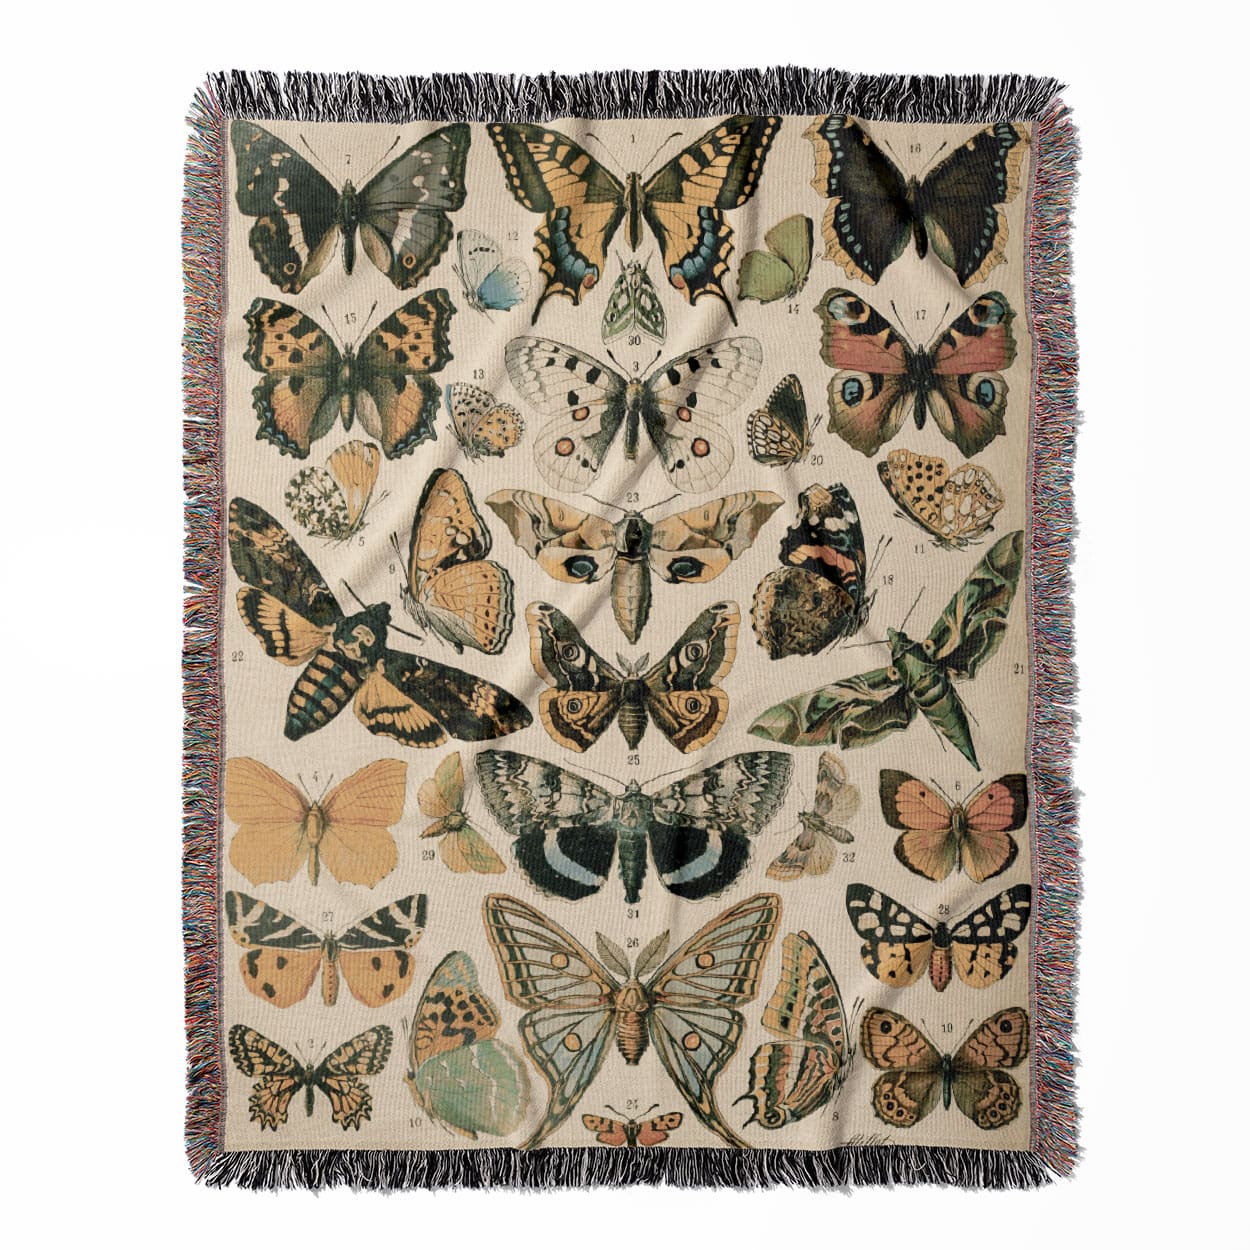 Butterflies woven throw blanket, crafted from 100% cotton, featuring a soft and cozy texture with Adolphe Millot's butterfly illustrations for home decor.